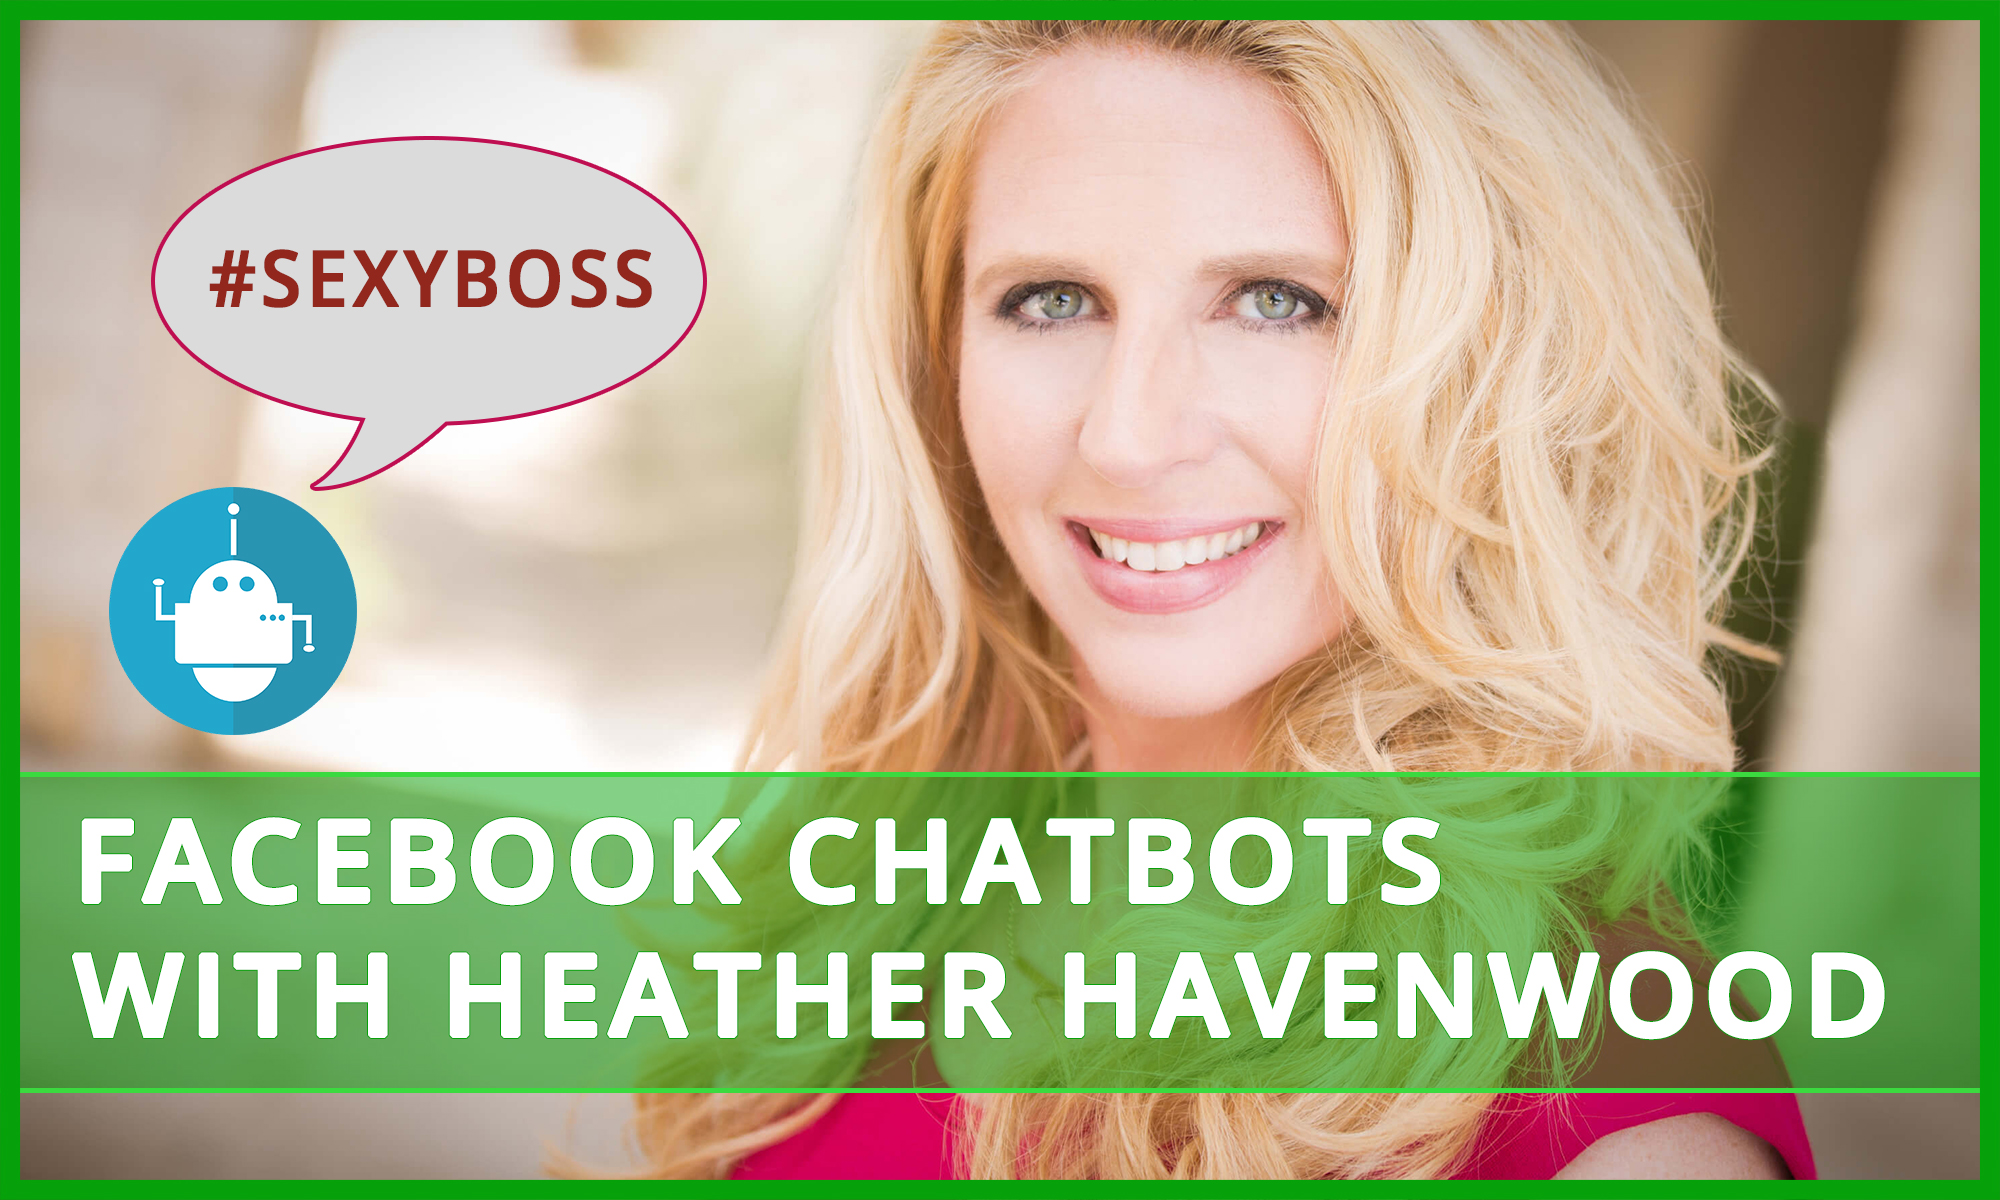 Interview About Chatbots with Heather Havenwood aka Sexy Boss